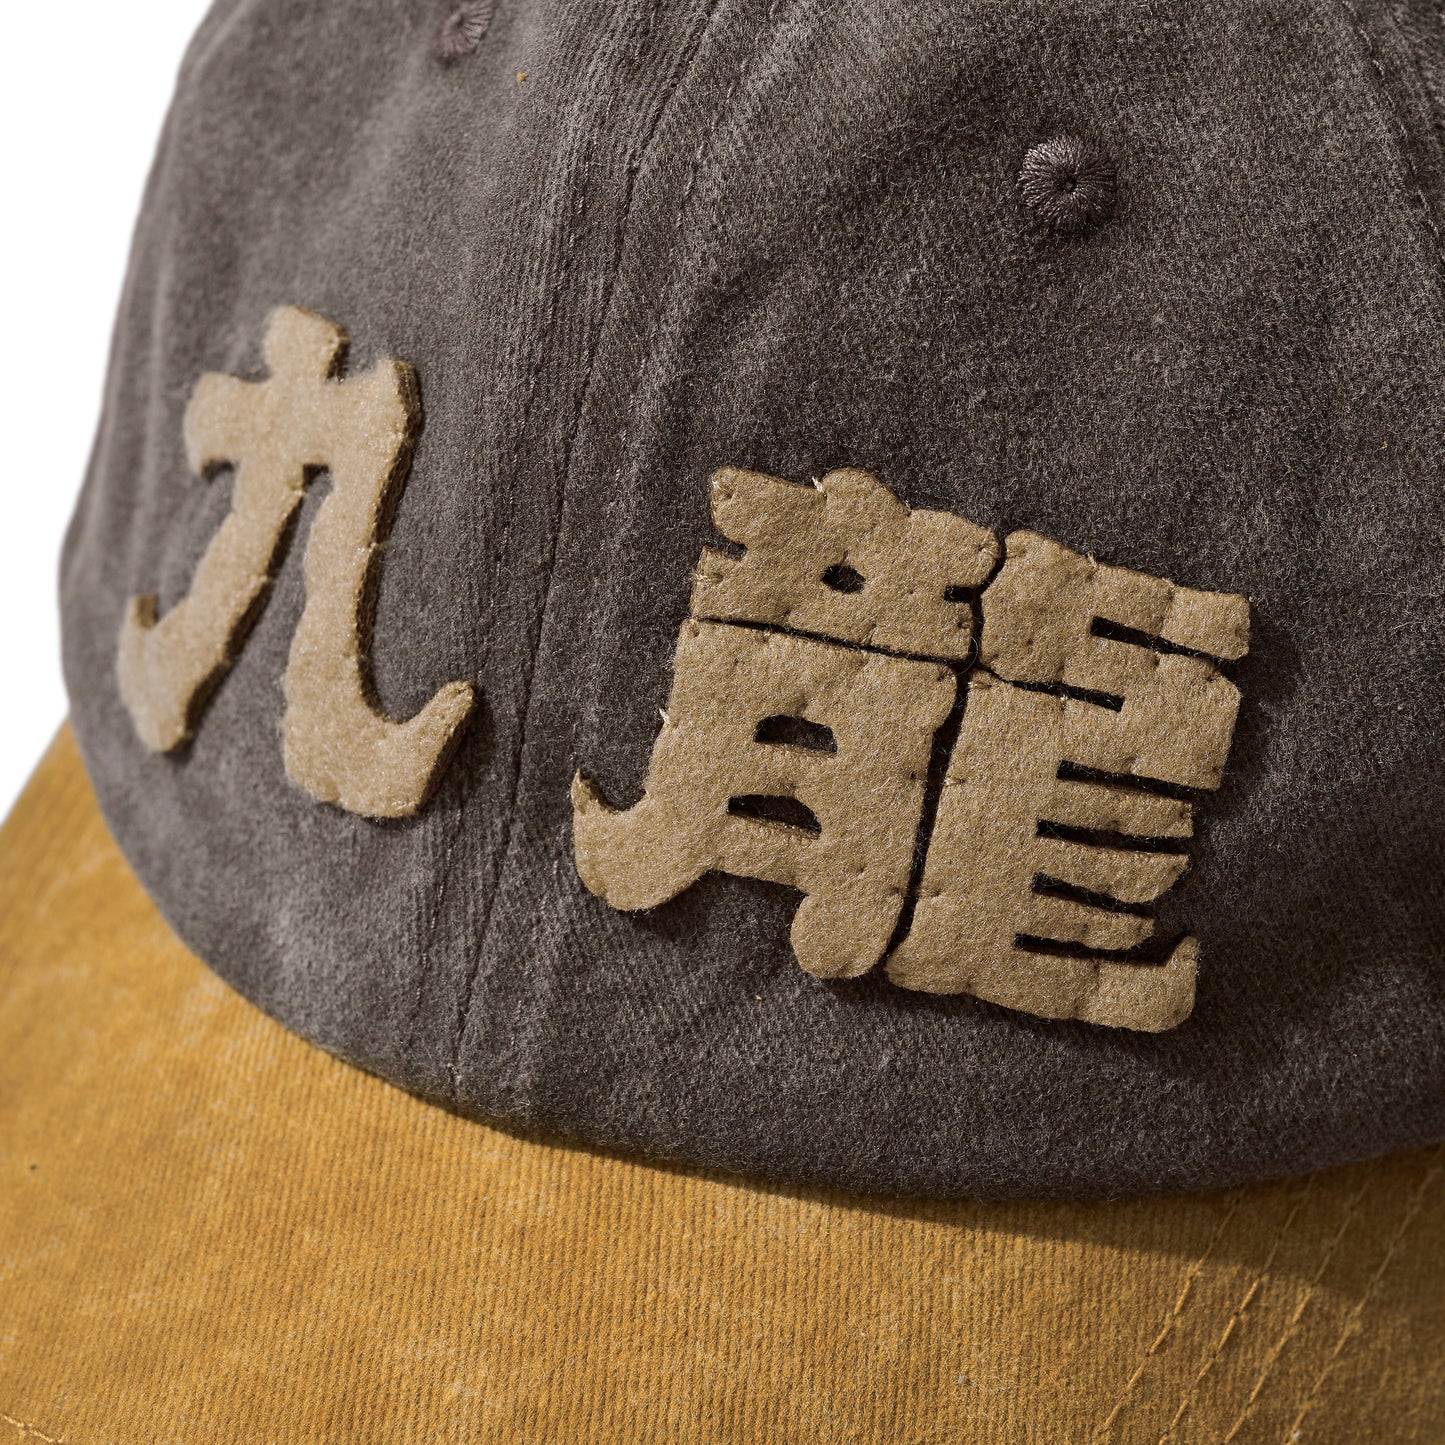 TWO TONE FADED WASHED HAND QUILTED “KOWLOON” CAP / SABLE BROWN